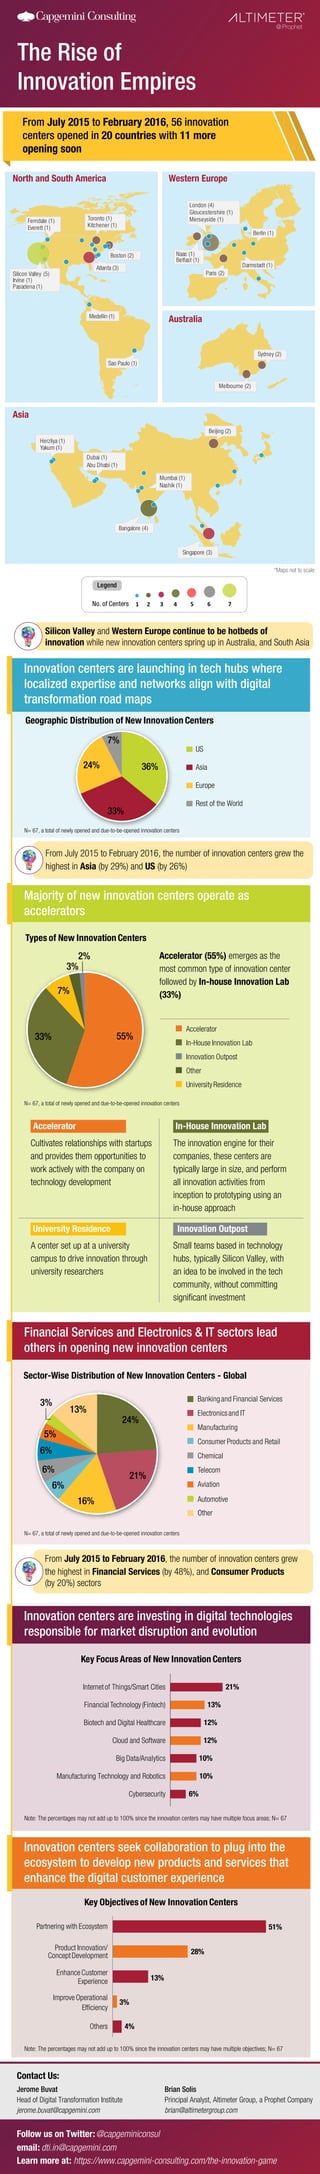 The Rise of
Innovation Empires
321 4No. of Centers 5 6 7
Legend
Silicon Valley and Western Europe continue to be hotbeds of
innovation while new innovation centers spring up in Australia, and South Asia
From July 2015 to February 2016, 56 innovation
centers opened in 20 countries with 11 more
opening soon
Innovation centers are launching in tech hubs where
localized expertise and networks align with digital
transformation road maps
Majority of new innovation centers operate as
accelerators
Accelerator
UniversityResidence
Other
Innovation Outpost
In-House Innovation Lab
Types of New Innovation Centers
55%33%
7%
3%
2% Accelerator (55%) emerges as the
most common type of innovation center
followed by In-house Innovation Lab
(33%)
Innovation centers seek collaboration to plug into the
ecosystem to develop new products and services that
enhance the digital customer experience
Note: The percentages may not add up to 100% since the innovation centers may have multiple objectives; N= 67
4%
3%
13%
28%
51%
Others
ImproveOperational
Efﬁciency
EnhanceCustomer
Experience
Product Innovation/
ConceptDevelopment
Partnering with Ecosystem
Key Objectives of New Innovation Centers
email: dti.in@capgemini.com
Learn more at: https://www.capgemini-consulting.com/the-innovation-game
Financial Services and Electronics & IT sectors lead
others in opening new innovation centers
From July 2015 to February 2016, the number of innovation centers grew
the highest in Financial Services (by 48%), and Consumer Products
(by 20%) sectors
Sector-Wise Distribution of New Innovation Centers - Global
N= 67, a total of newly opened and due-to-be-opened innovation centers
Innovation centers are investing in digital technologies
responsible for market disruption and evolution
N= 67, a total of newly opened and due-to-be-opened innovation centers
N= 67, a total of newly opened and due-to-be-opened innovation centers
Cultivates relationships with startups
and provides them opportunities to
work actively with the company on
technology development
The innovation engine for their
companies, these centers are
typically large in size, and perform
all innovation activities from
inception to prototyping using an
in-house approach
Small teams based in technology
hubs, typically Silicon Valley, with
an idea to be involved in the tech
community, without committing
signiﬁcant investment
A center set up at a university
campus to drive innovation through
university researchers
Note: The percentages may not add up to 100% since the innovation centers may have multiple focus areas; N= 67
Key Focus Areas of New Innovation Centers
6%
10%
10%
12%
12%
13%
21%
Manufacturing Technology and Robotics
Cybersecurity
Financial Technology(Fintech)
Cloud and Software
Internetof Things/Smart Cities
Big Data/Analytics
Biotech and Digital Healthcare
Accelerator In-House Innovation Lab
University Residence Innovation Outpost
24%
21%
16%
6%
6%
6%
5%
3%
13% Electronicsand IT
Manufacturing
Chemical
Telecom
Aviation
Automotive
Other
Bankingand Financial Services
Consumer Products and Retail
@ Prophet
Brian Solis
Principal Analyst, Altimeter Group, a Prophet Company
brian@altimetergroup.com
Jerome Buvat
Head of Digital Transformation Institute
jerome.buvat@capgemini.com
Contact Us:
@capgeminiconsulFollow us on Twitter:
From July 2015 to February 2016, the number of innovation centers grew the
highest in Asia (by 29%) and US (by 26%) 
Geographic Distribution of New Innovation Centers
ly opened and due to be opened innovation cente
33%
24%
7%
36%
Rest of the World
Europe
US
Asia
*Maps not to scale
Bangalore (4)
Mumbai (1)
Nashik (1)
Dubai (1)
Abu Dhabi (1)
Herzliya (1)
Yakum (1)
Beijing (2)
Singapore (3)
Asia
Toronto (1)
Kitchener (1)
Ferndale (1)
Everett (1)
Boston (2)
Medellin (1)
Sao Paulo (1)
Atlanta (3)
Melbourne (2)
Sydney (2)
North and South America
Australia
Paris (2)
Naas (1)
Belfast (1)
London (4)
Gloucestershire (1)
Merseyside (1)
Western Europe
Silicon Valley (5)
Irvine (1)
Pasadena (1)
Berlin (1)
Darmstadt (1)
 